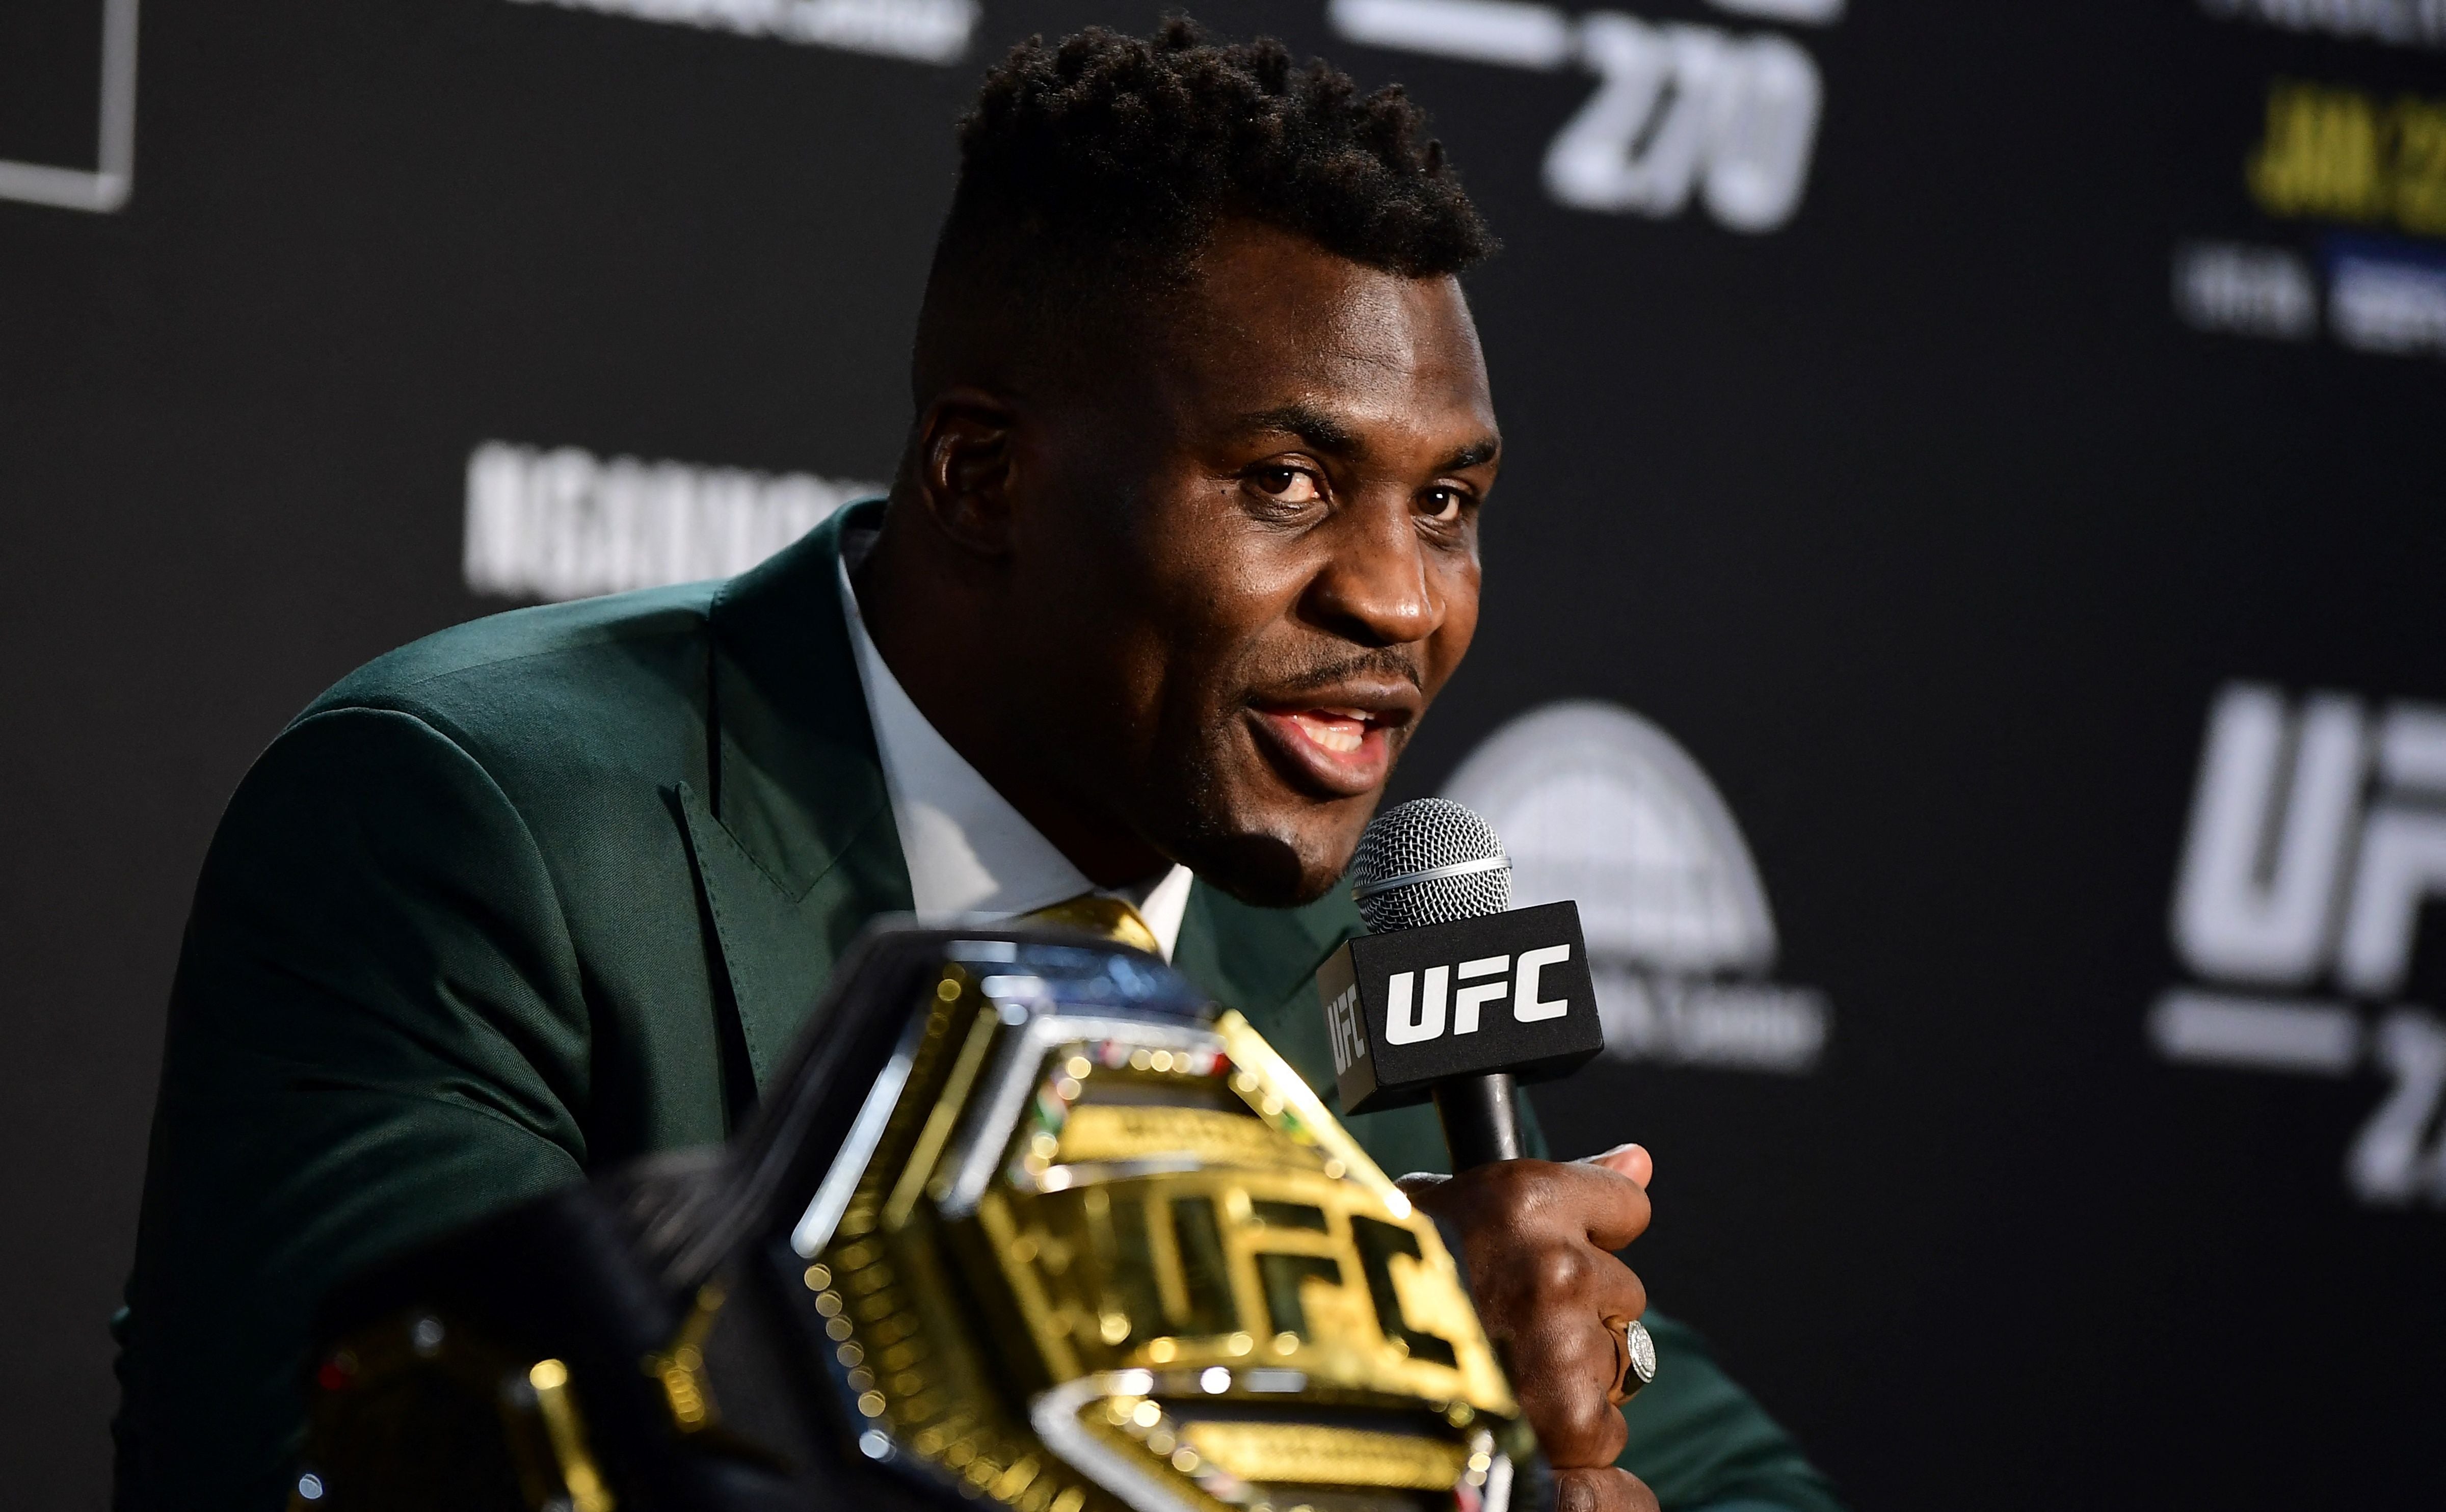 Francis Ngannou takes questions after beating Cyril Gane at UFC 270